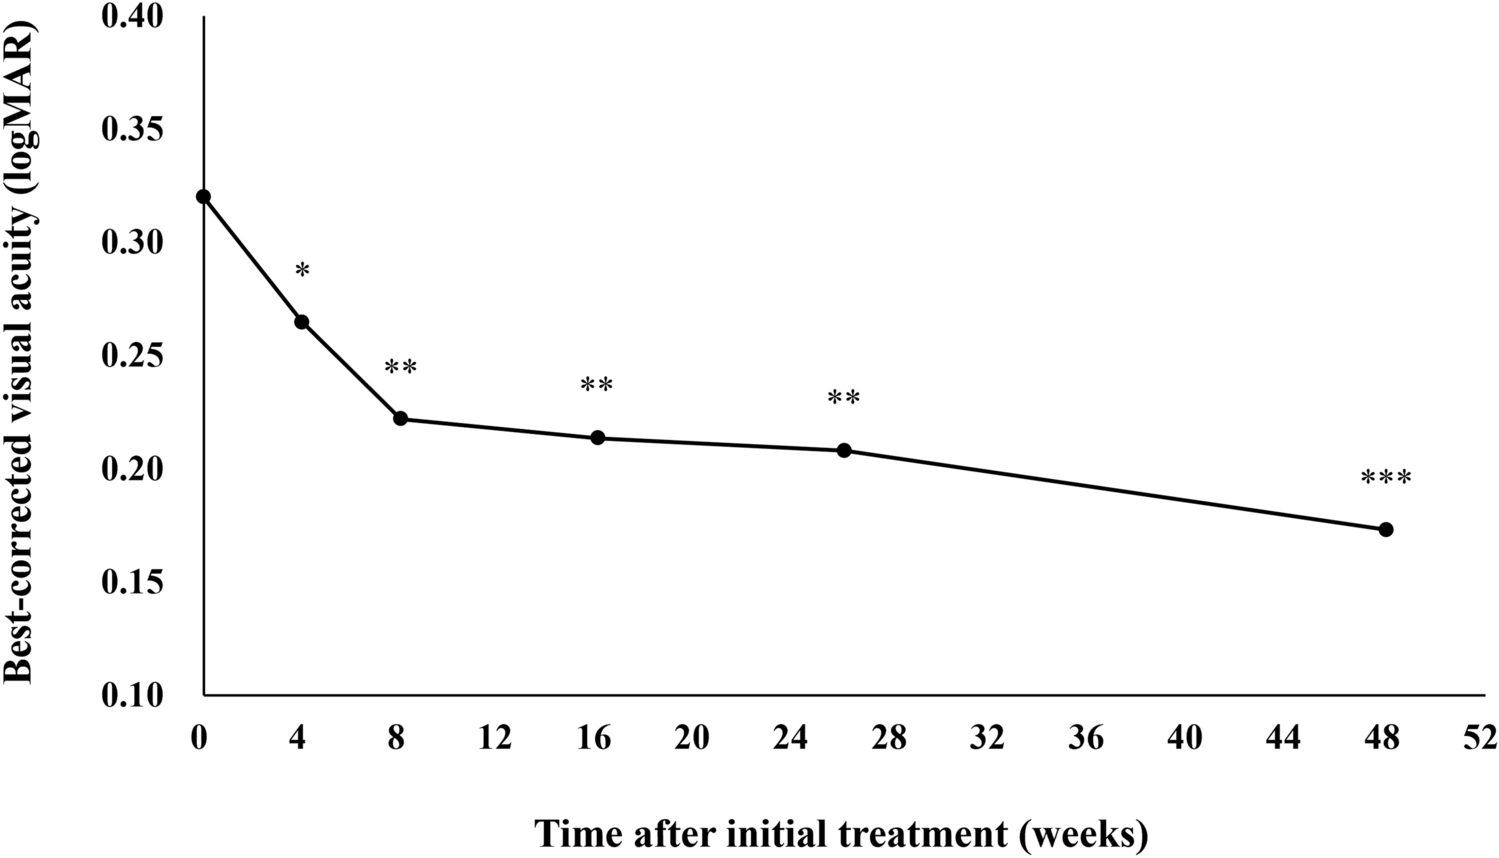 One-year results of treat-and-extend regimen with intravitreal faricimab for treatment-naïve neovascular age-related macular degeneration